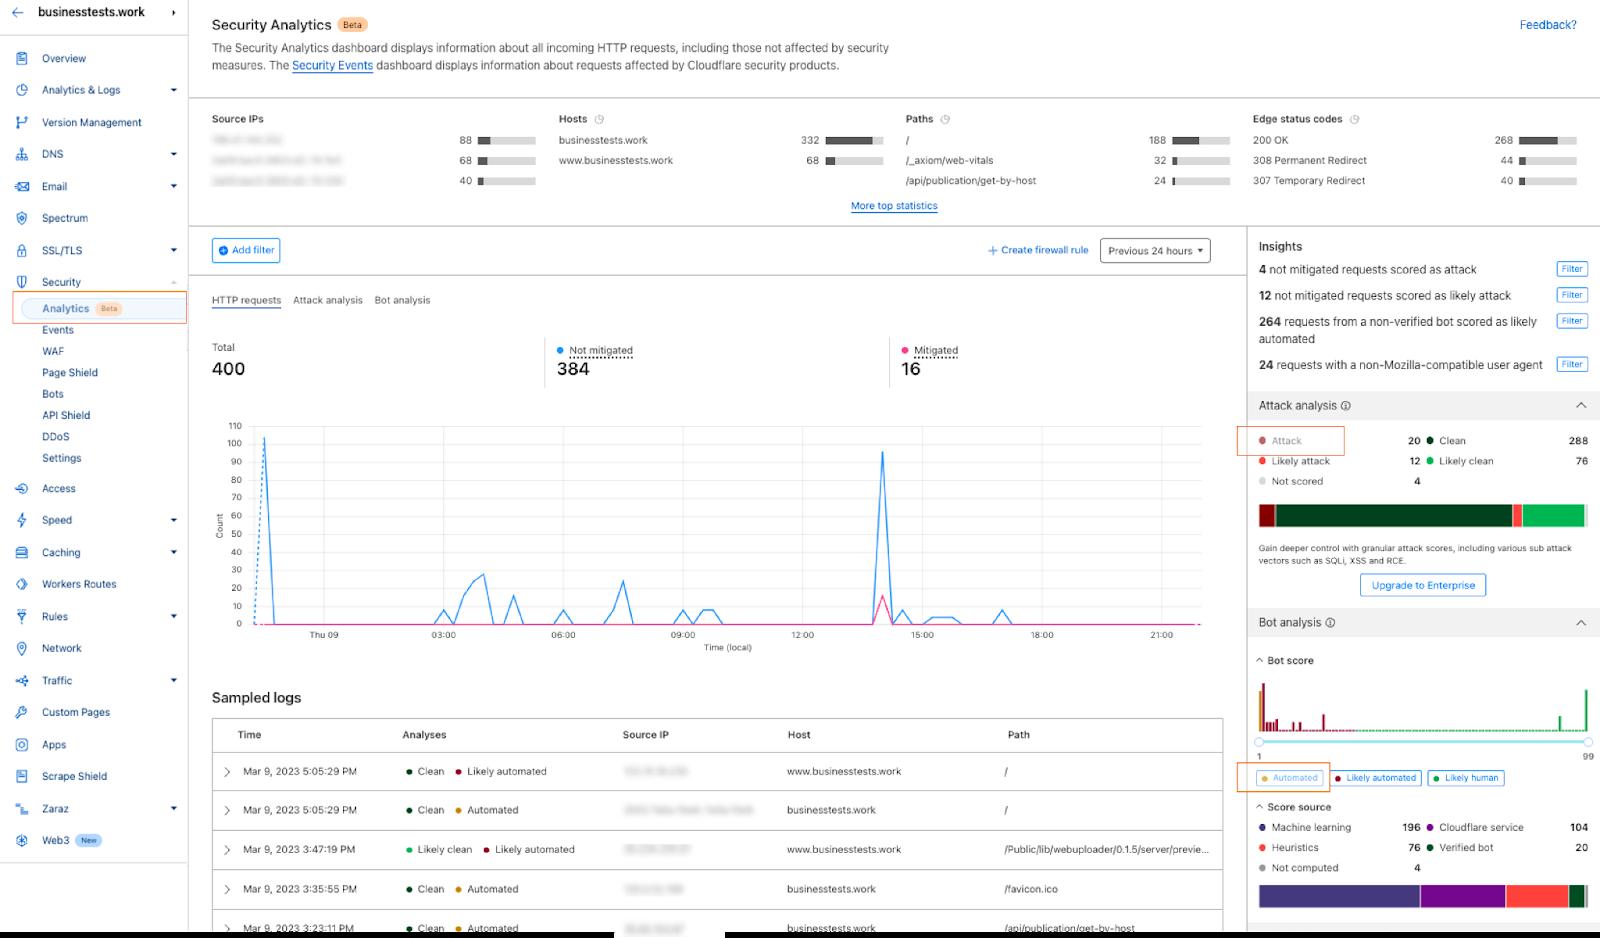 Announcing WAF Attack Score Lite and Security Analytics for business customers